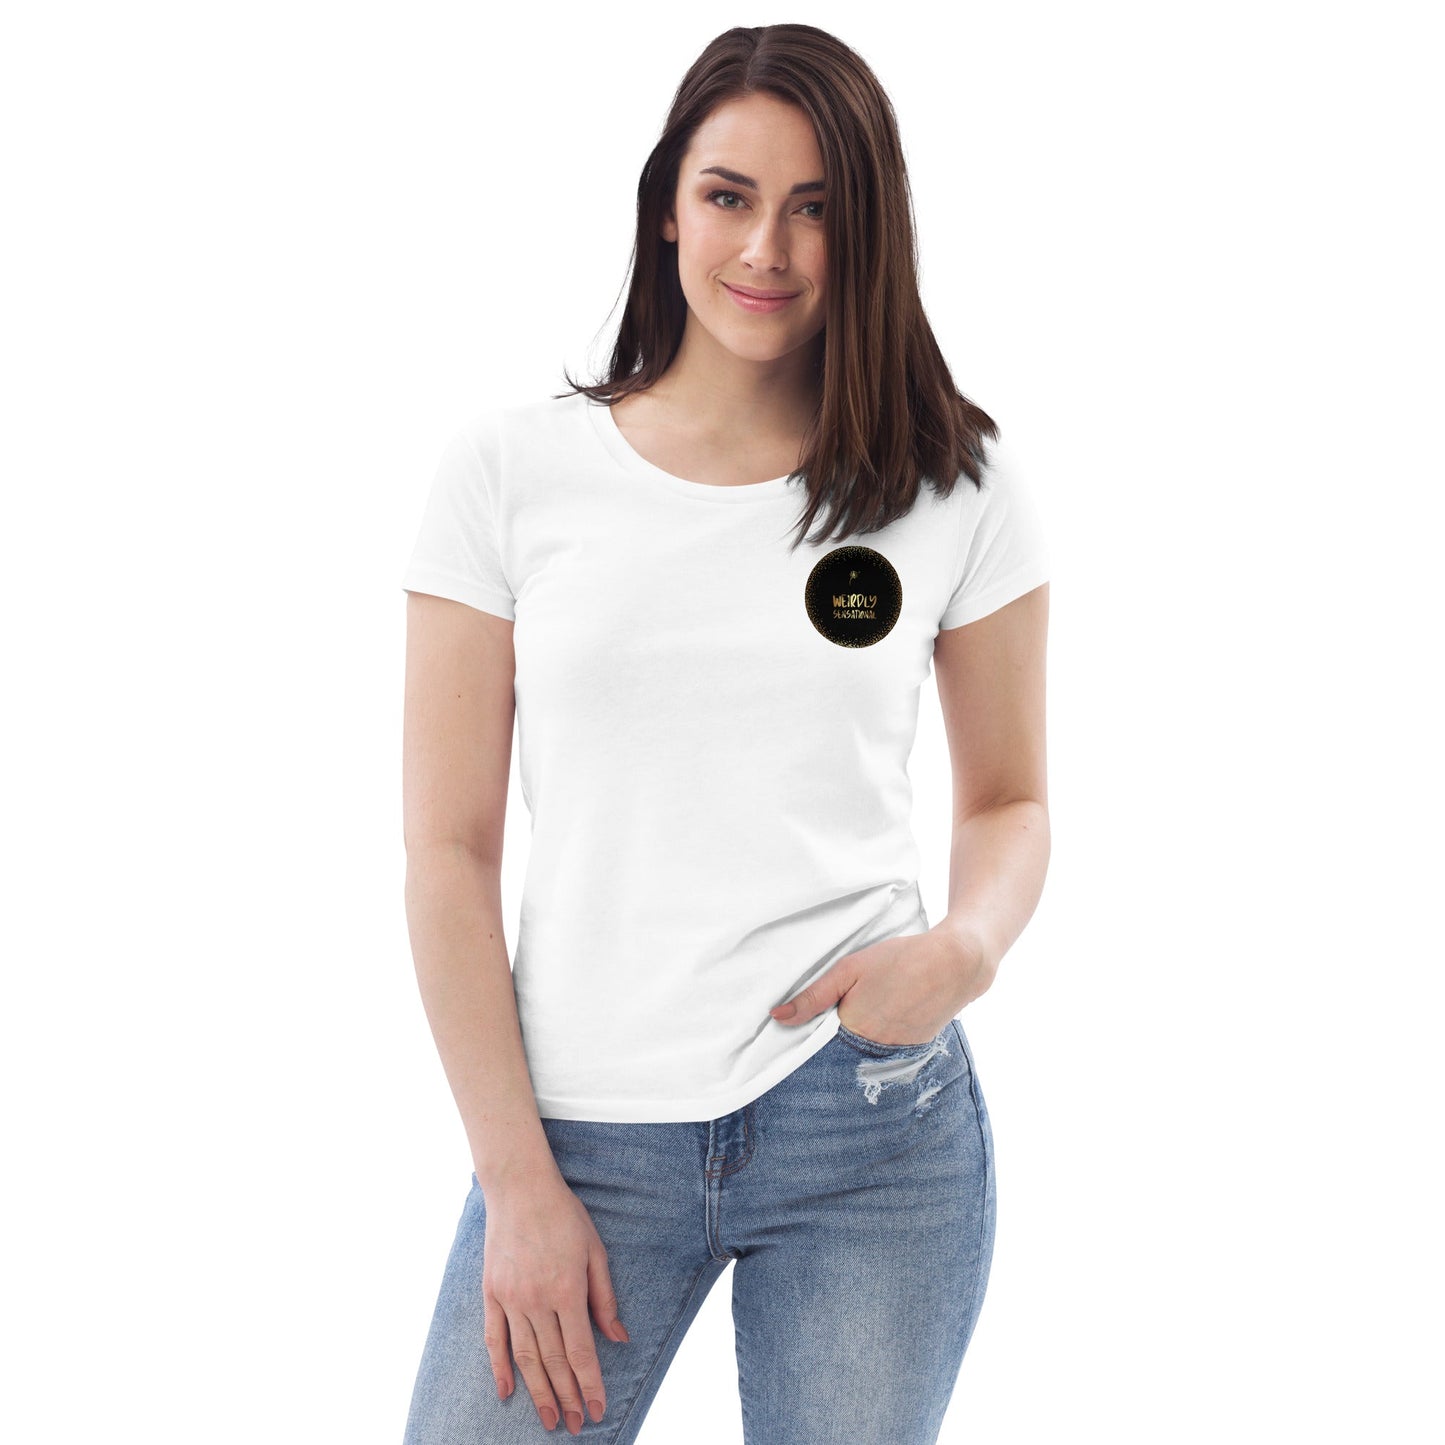 I cry Women's fitted eco tee - Weirdly Sensational